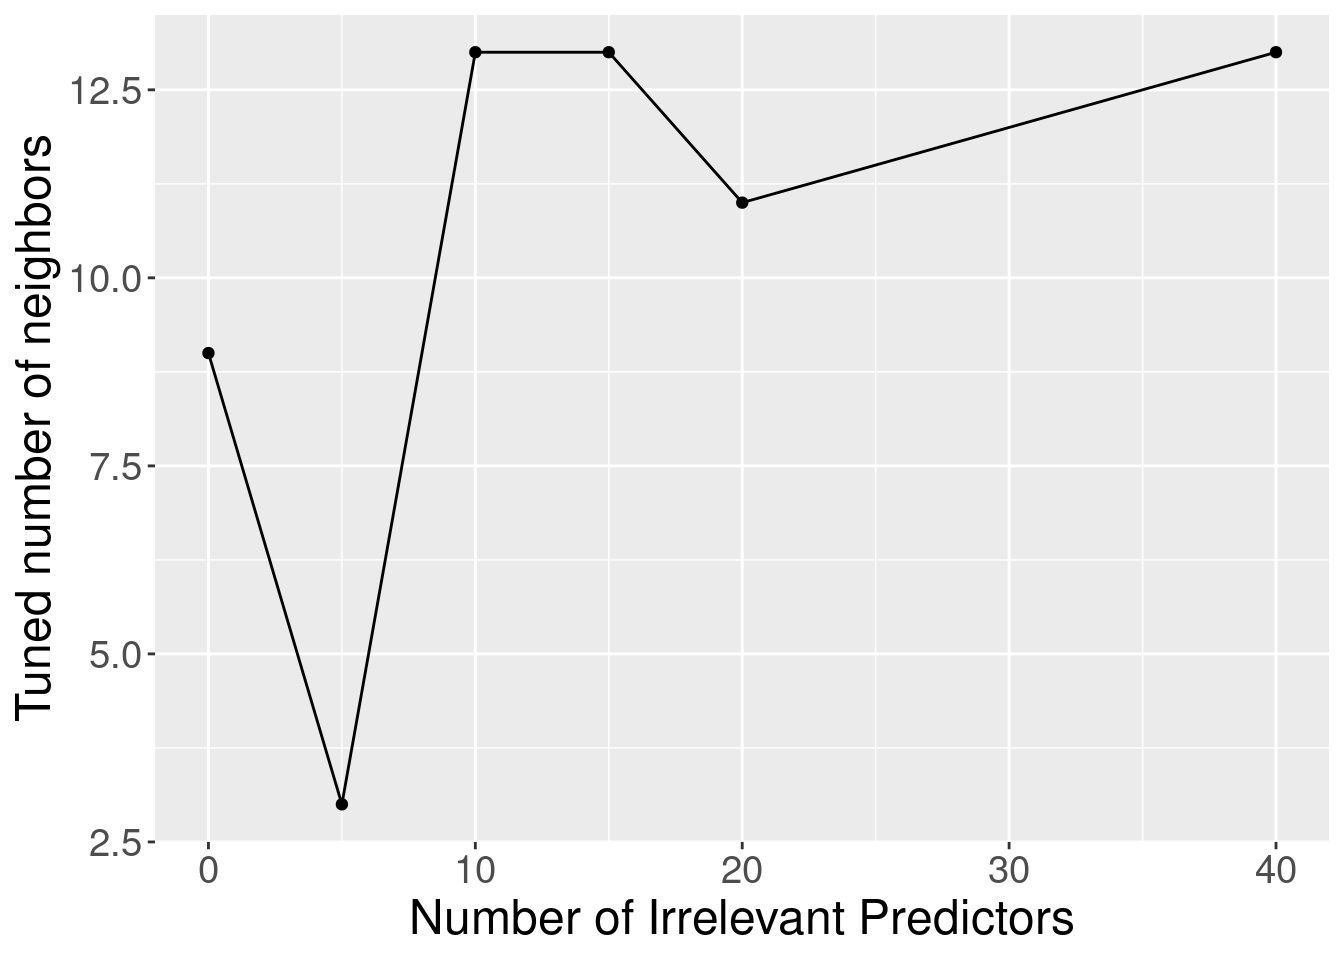 Tuned number of neighbors for varying number of irrelevant predictors.